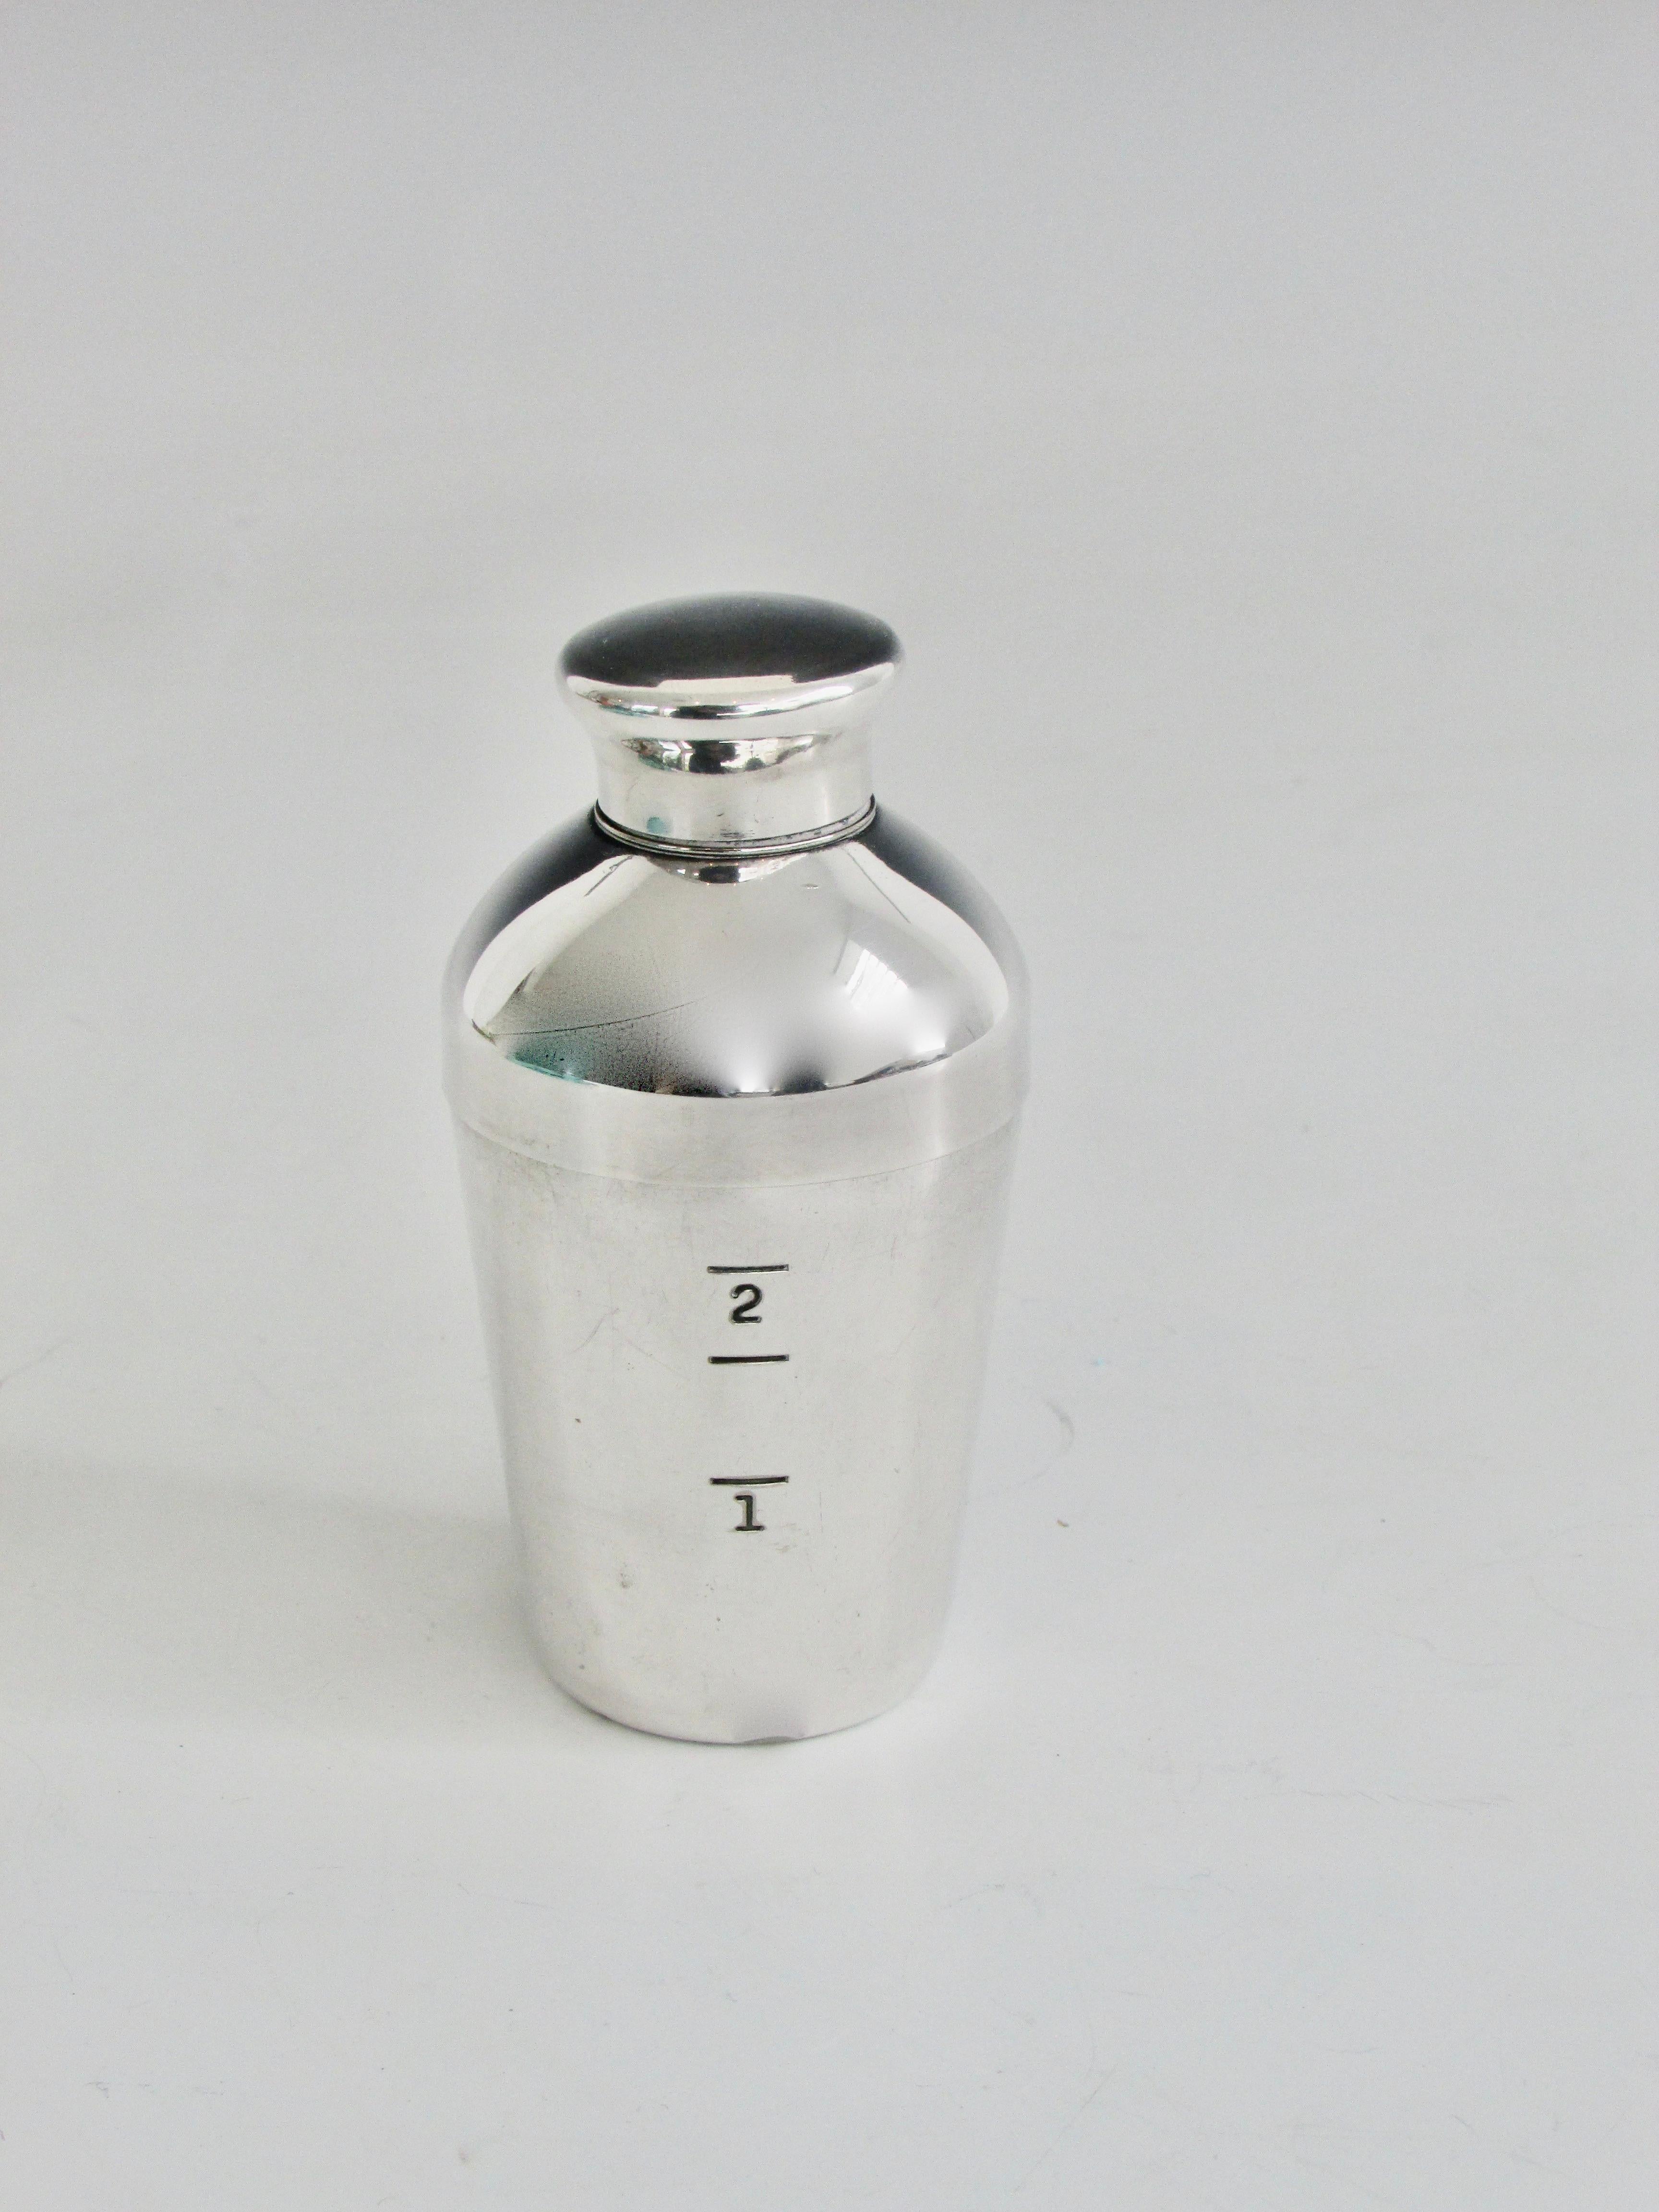 20th Century Mini Silver Plate Art Deco Shot Glass Size Jigger Cocktail Shaker by Napier For Sale